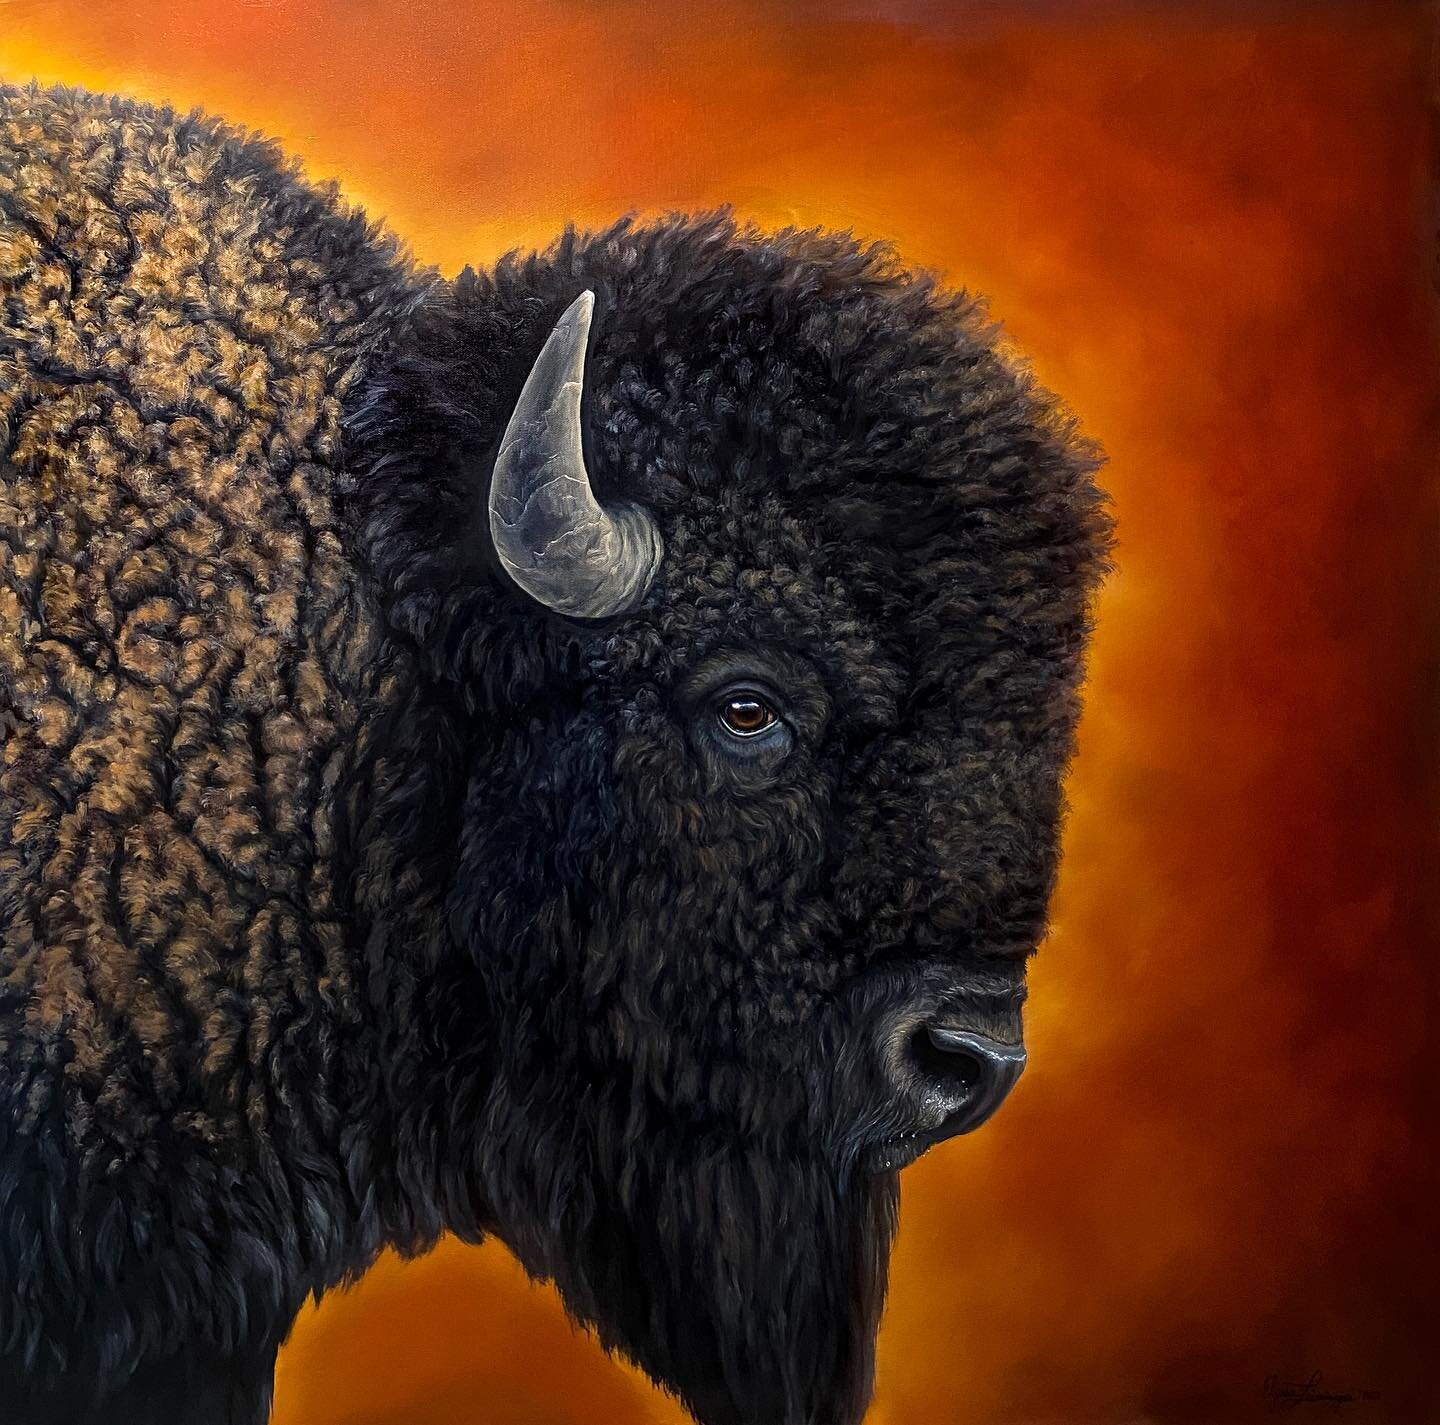 Introducing &ldquo;Lotta Bull!&rdquo; 

The most iconic symbol of the American West, the American bison symbolizes resilience, strength, unity, and prosperity. I utilized the warm reds and oranges in the background to represent the power of the bull 